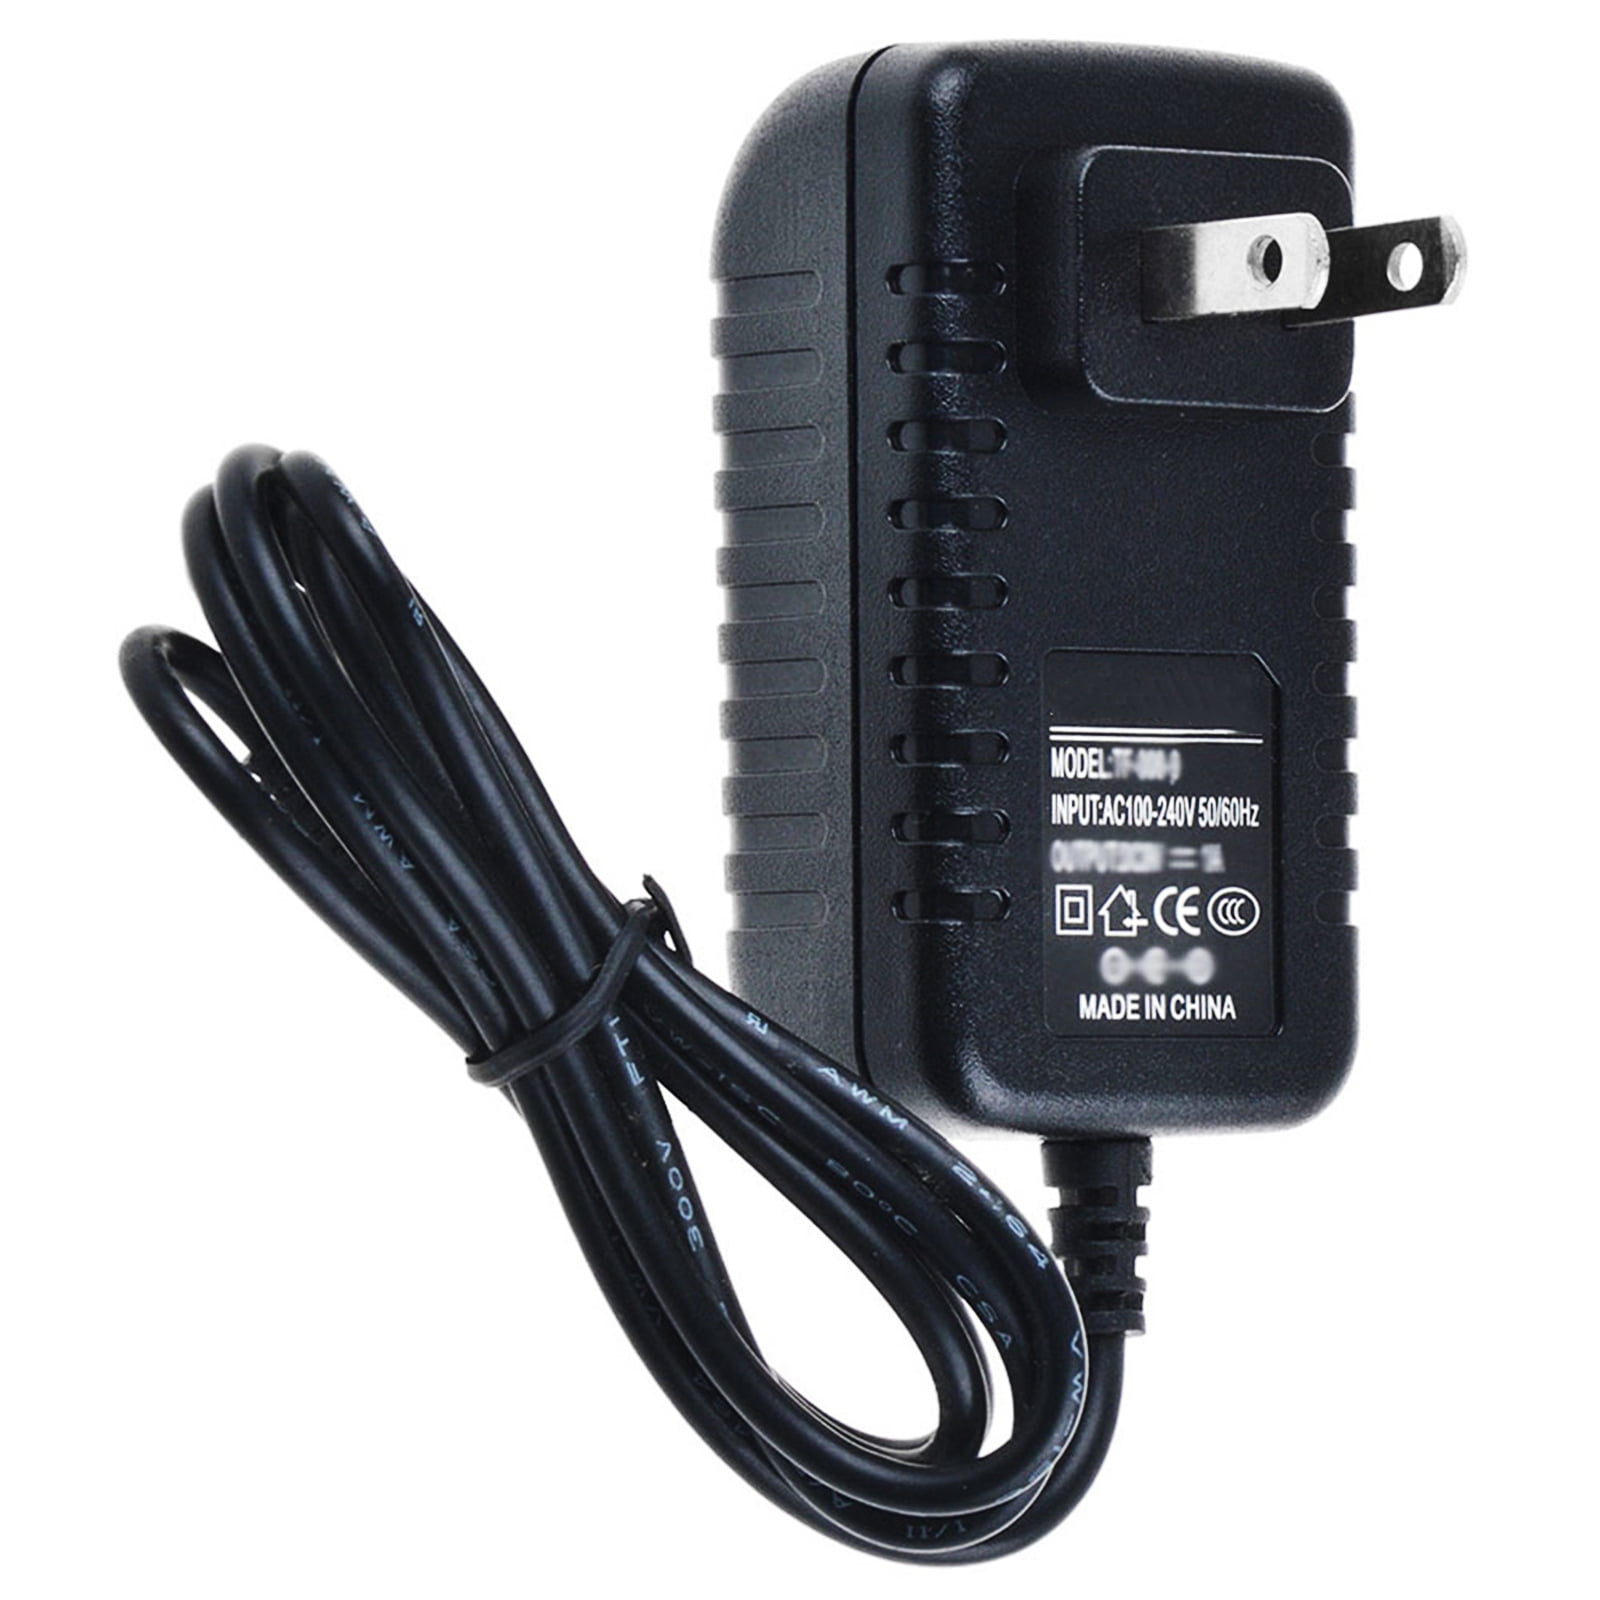 AC Adapter for PowerQuest Edge Edge Upright Exercise Bike 482U Fitness Equipmnt 